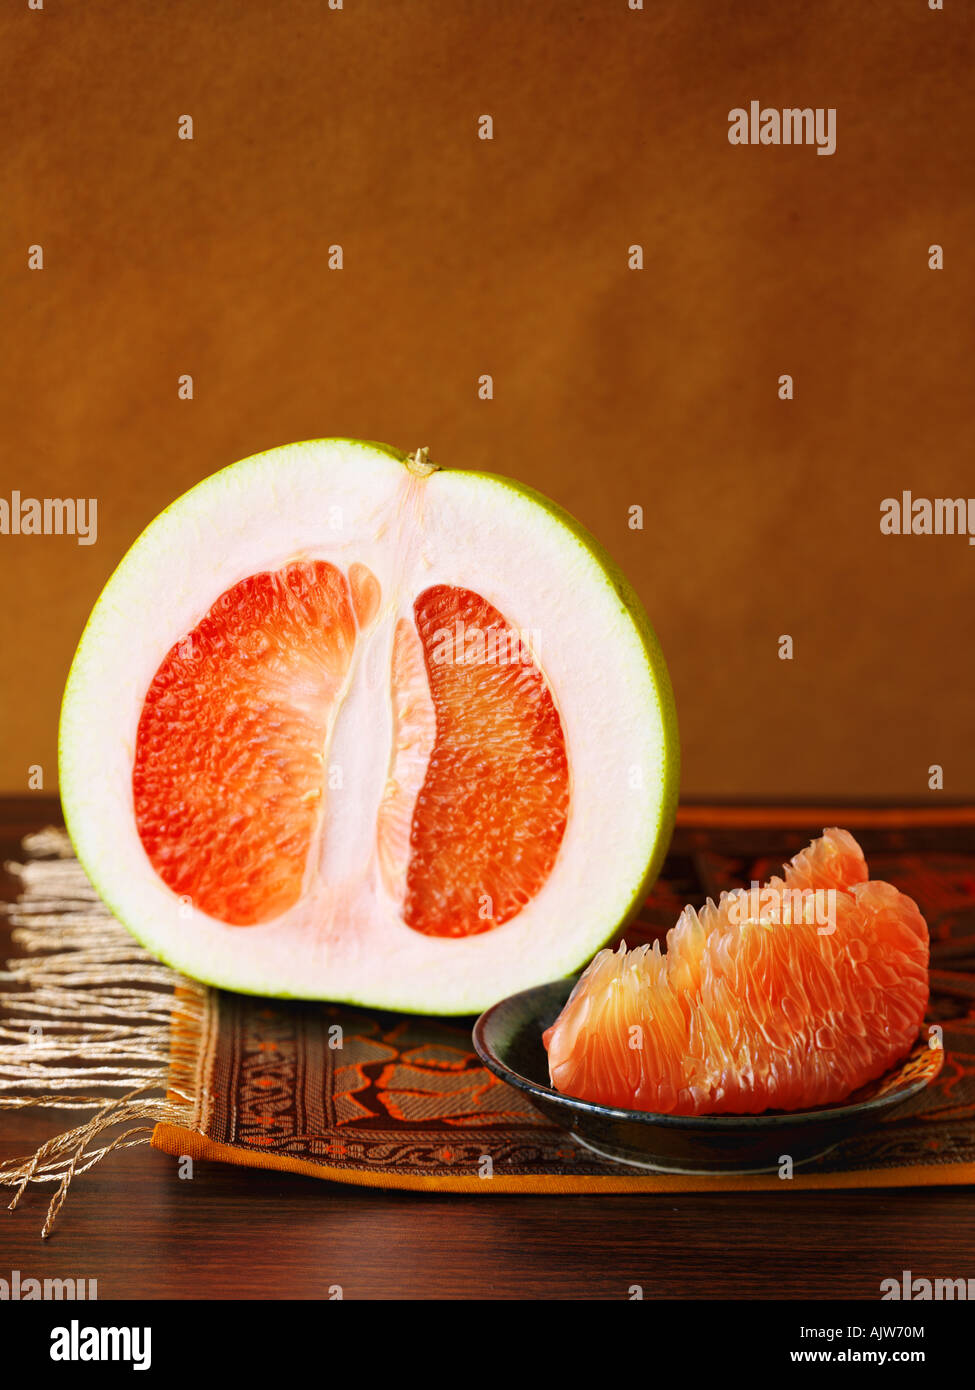 Red Pomelo Showing Sections Stock Photo